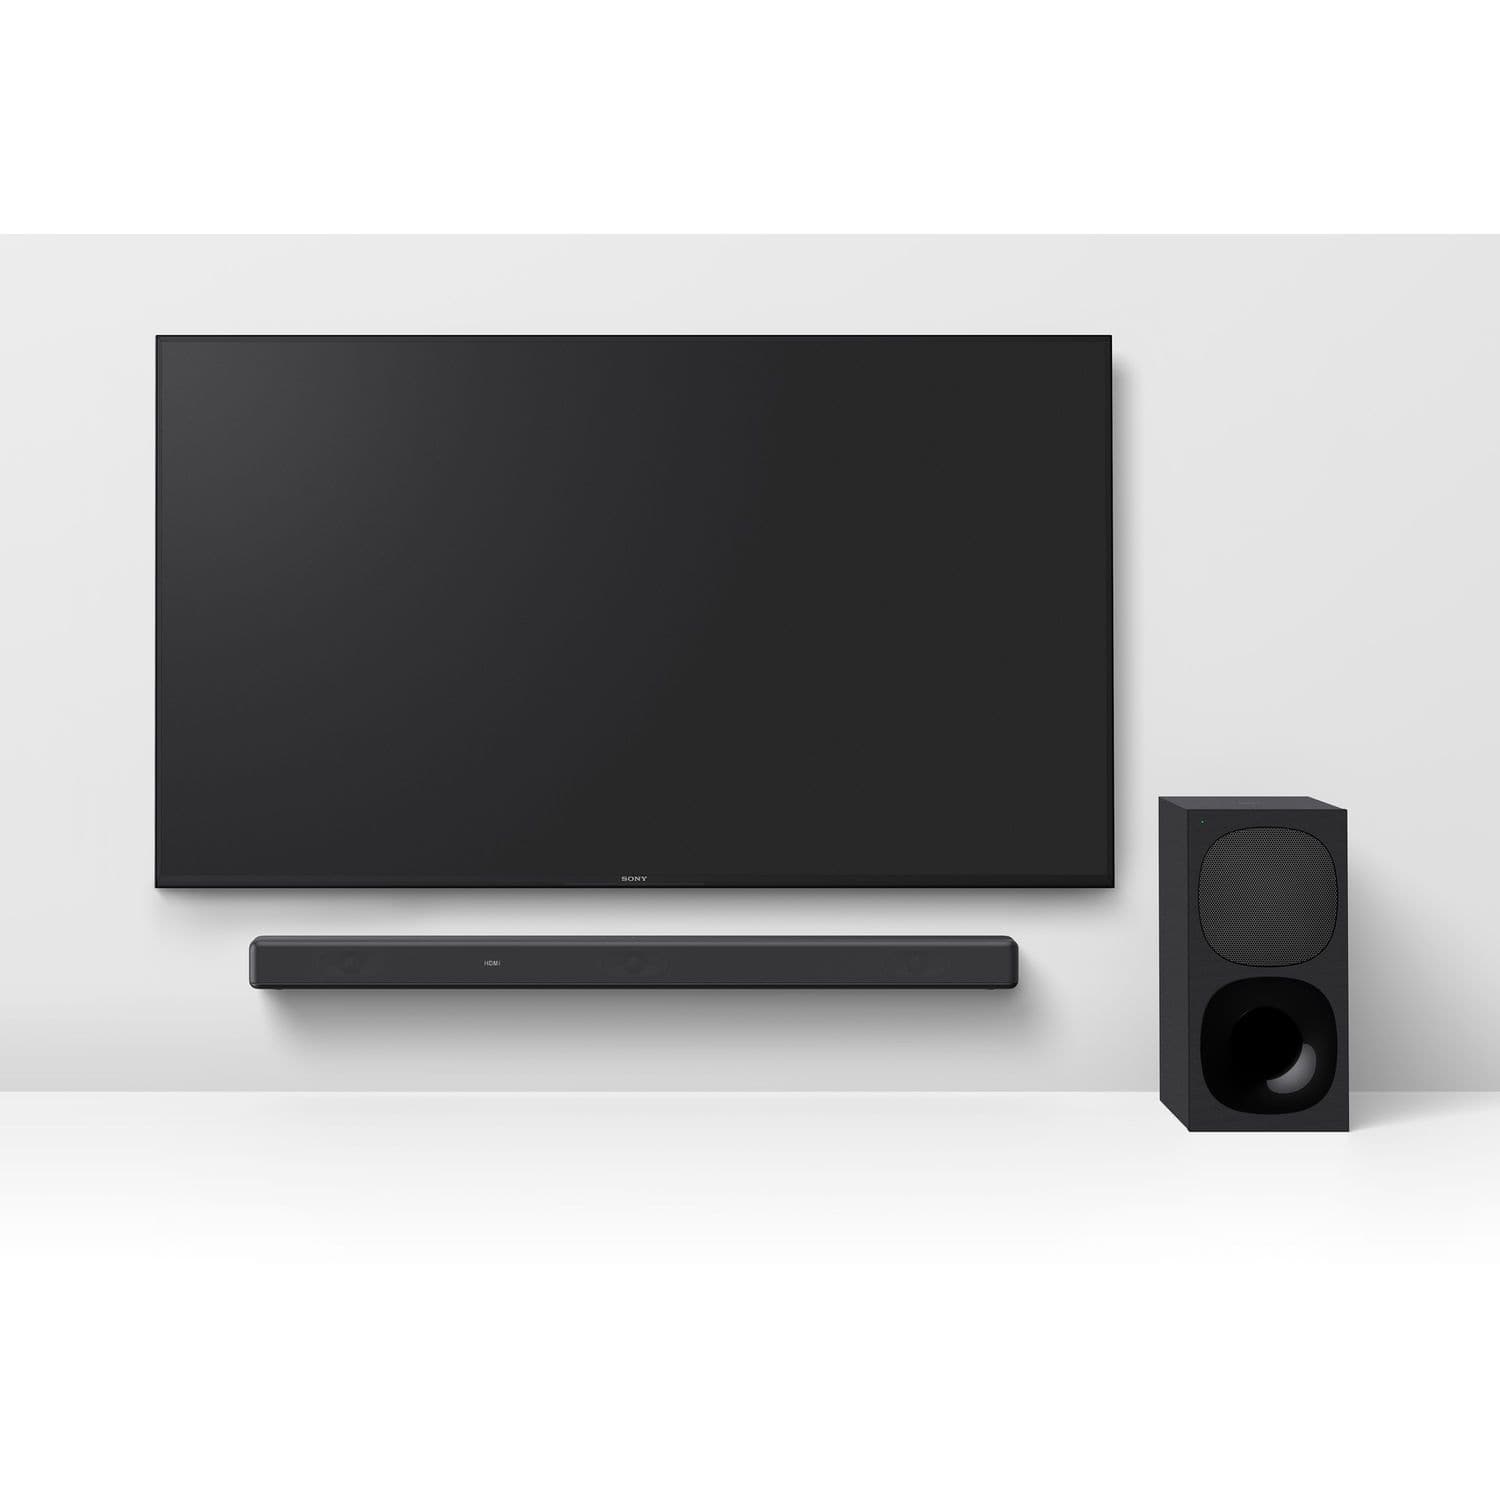 Système de barre sonore Sony HT-G700 400W 3,1 canaux